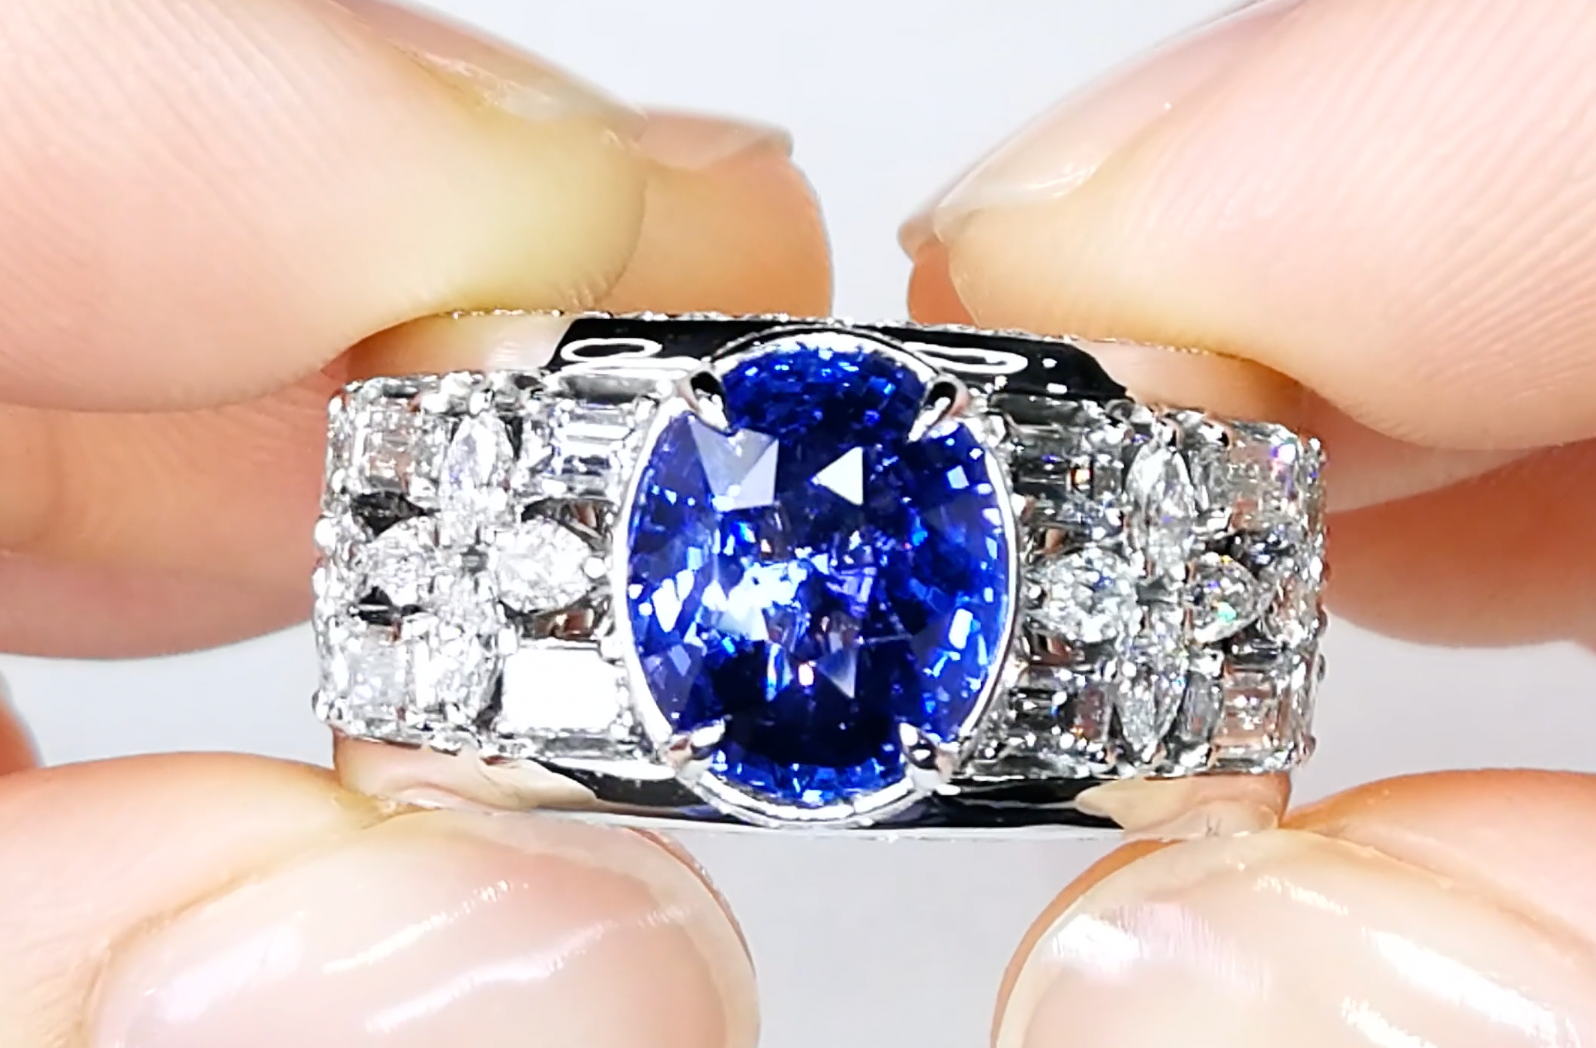 4.08ct Unheated Ceylon Blue Sapphire Ring with D Flawless Diamonds set in 18K White Gold